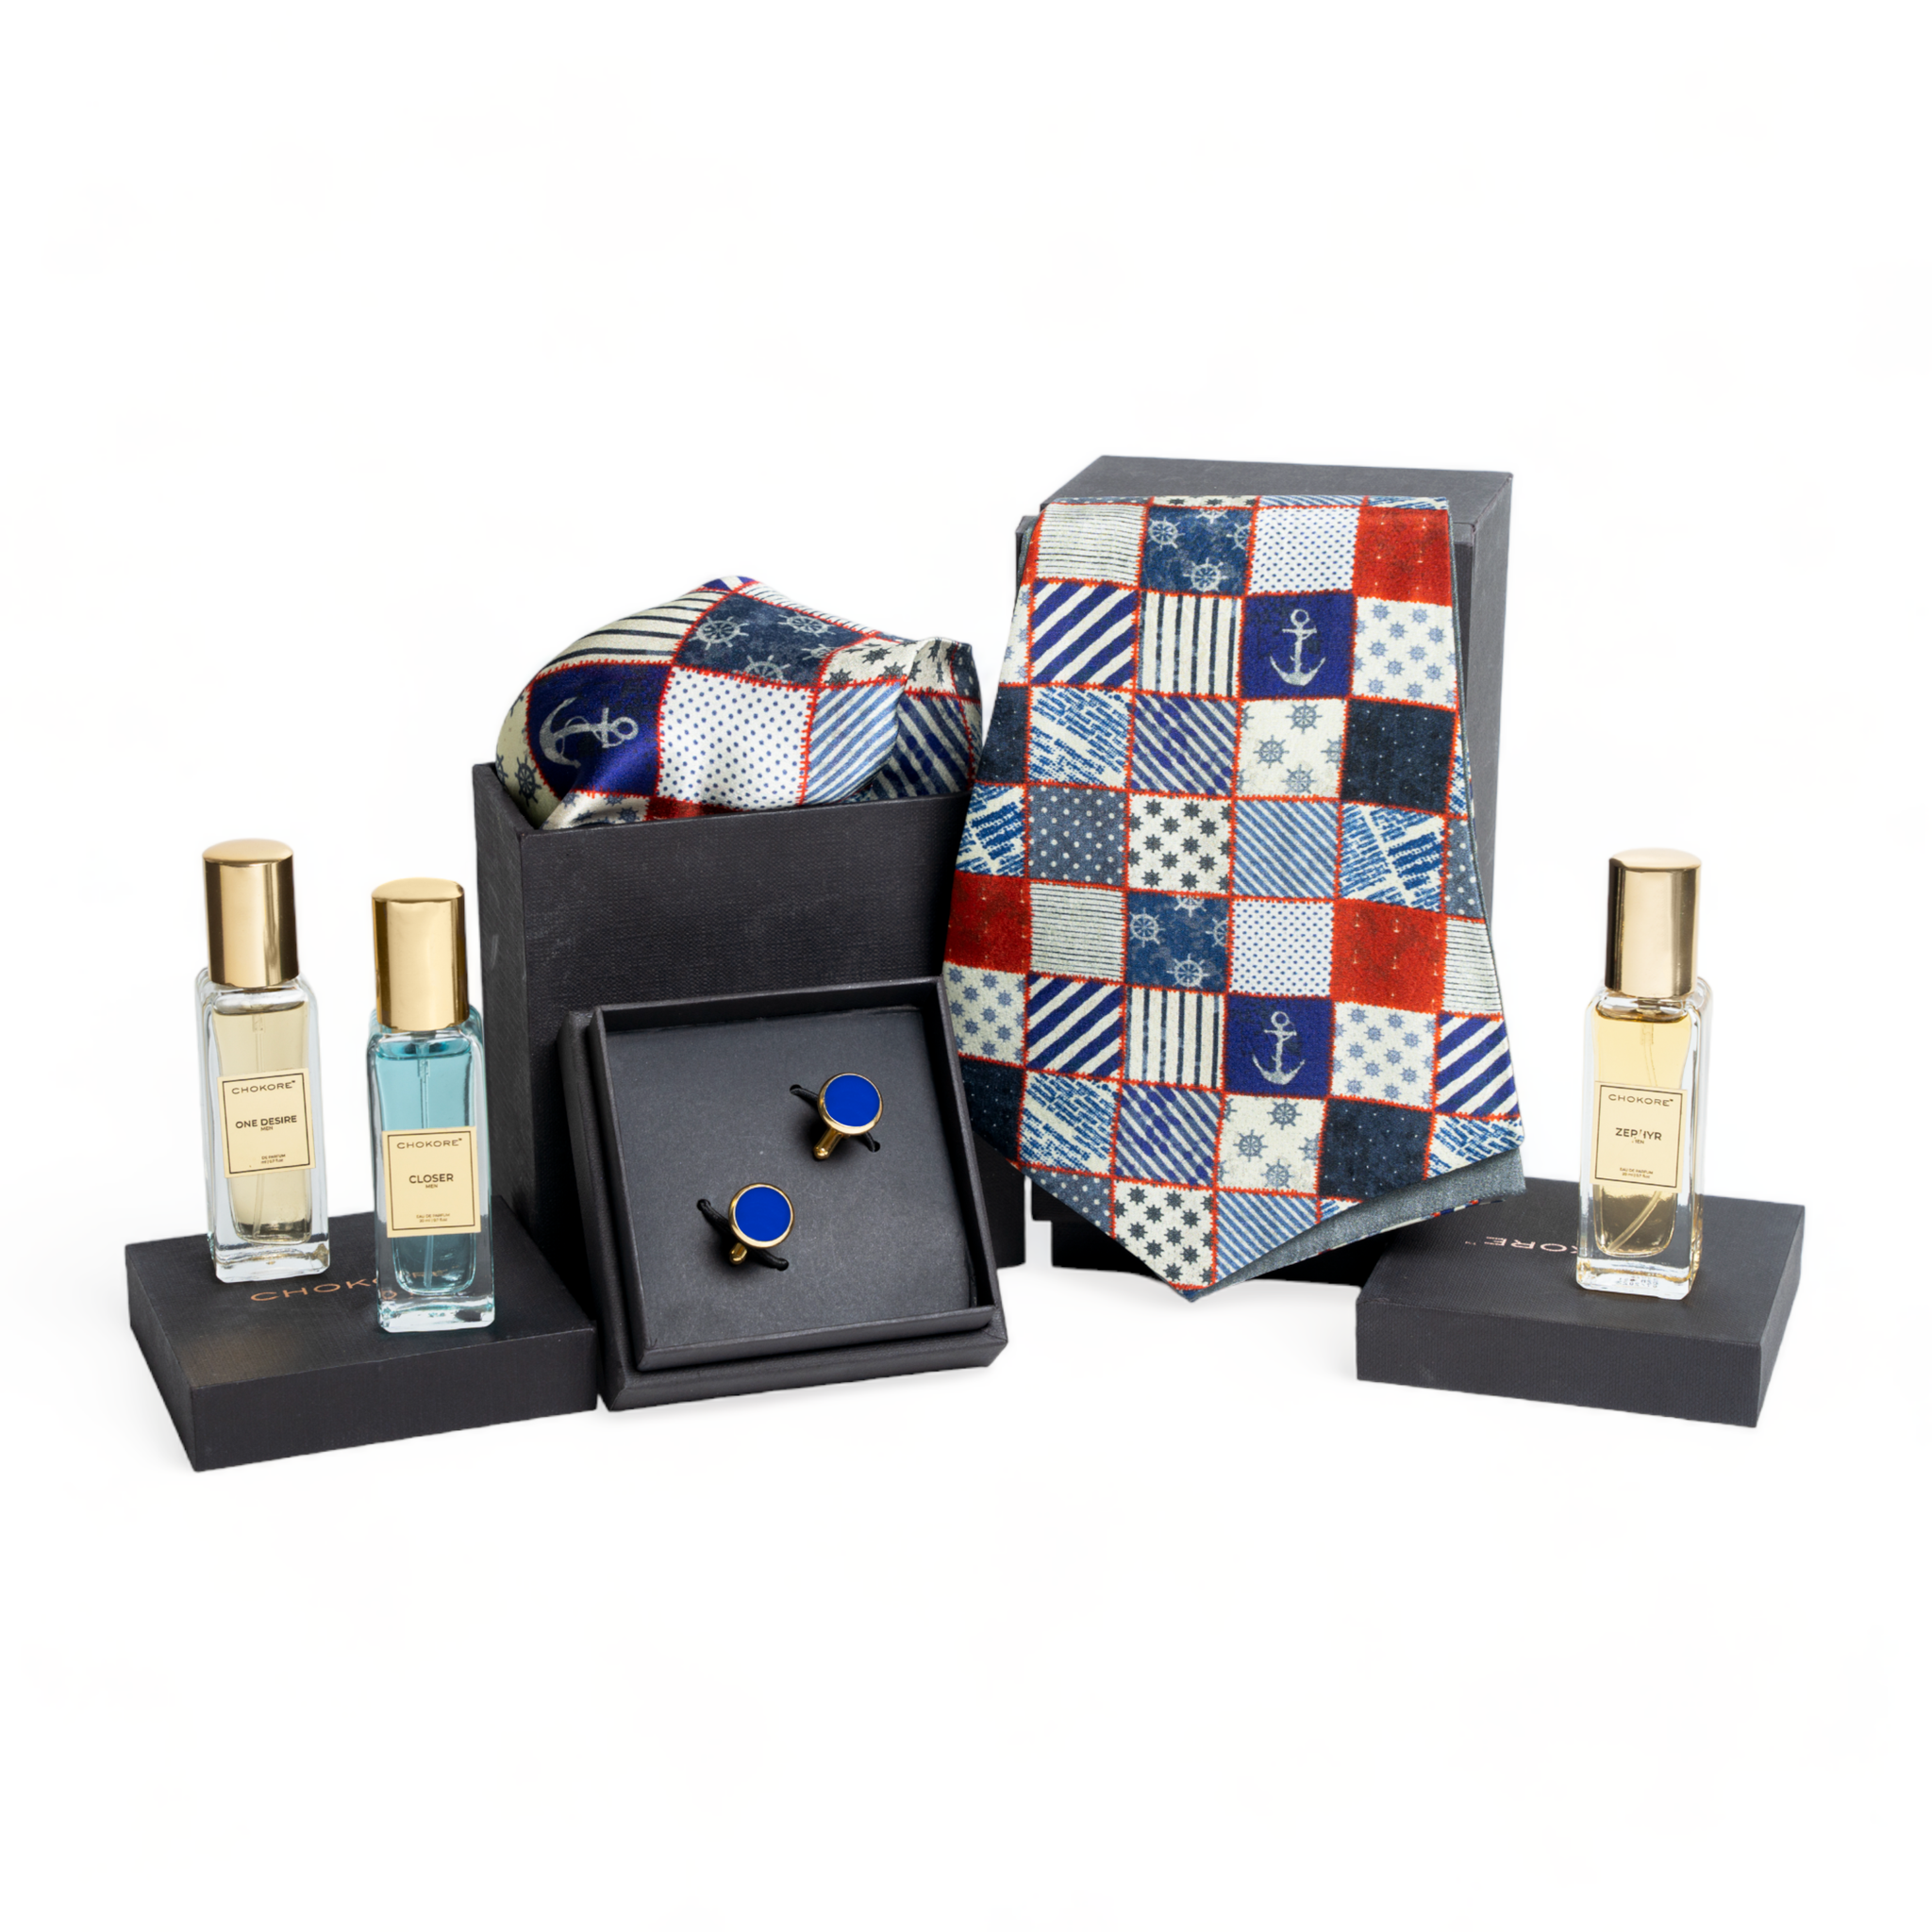 Chokore Special 4-in-1 Gift Set for Him (Silk Cravat, Pocket Square, Cufflinks, & Perfume Combo)